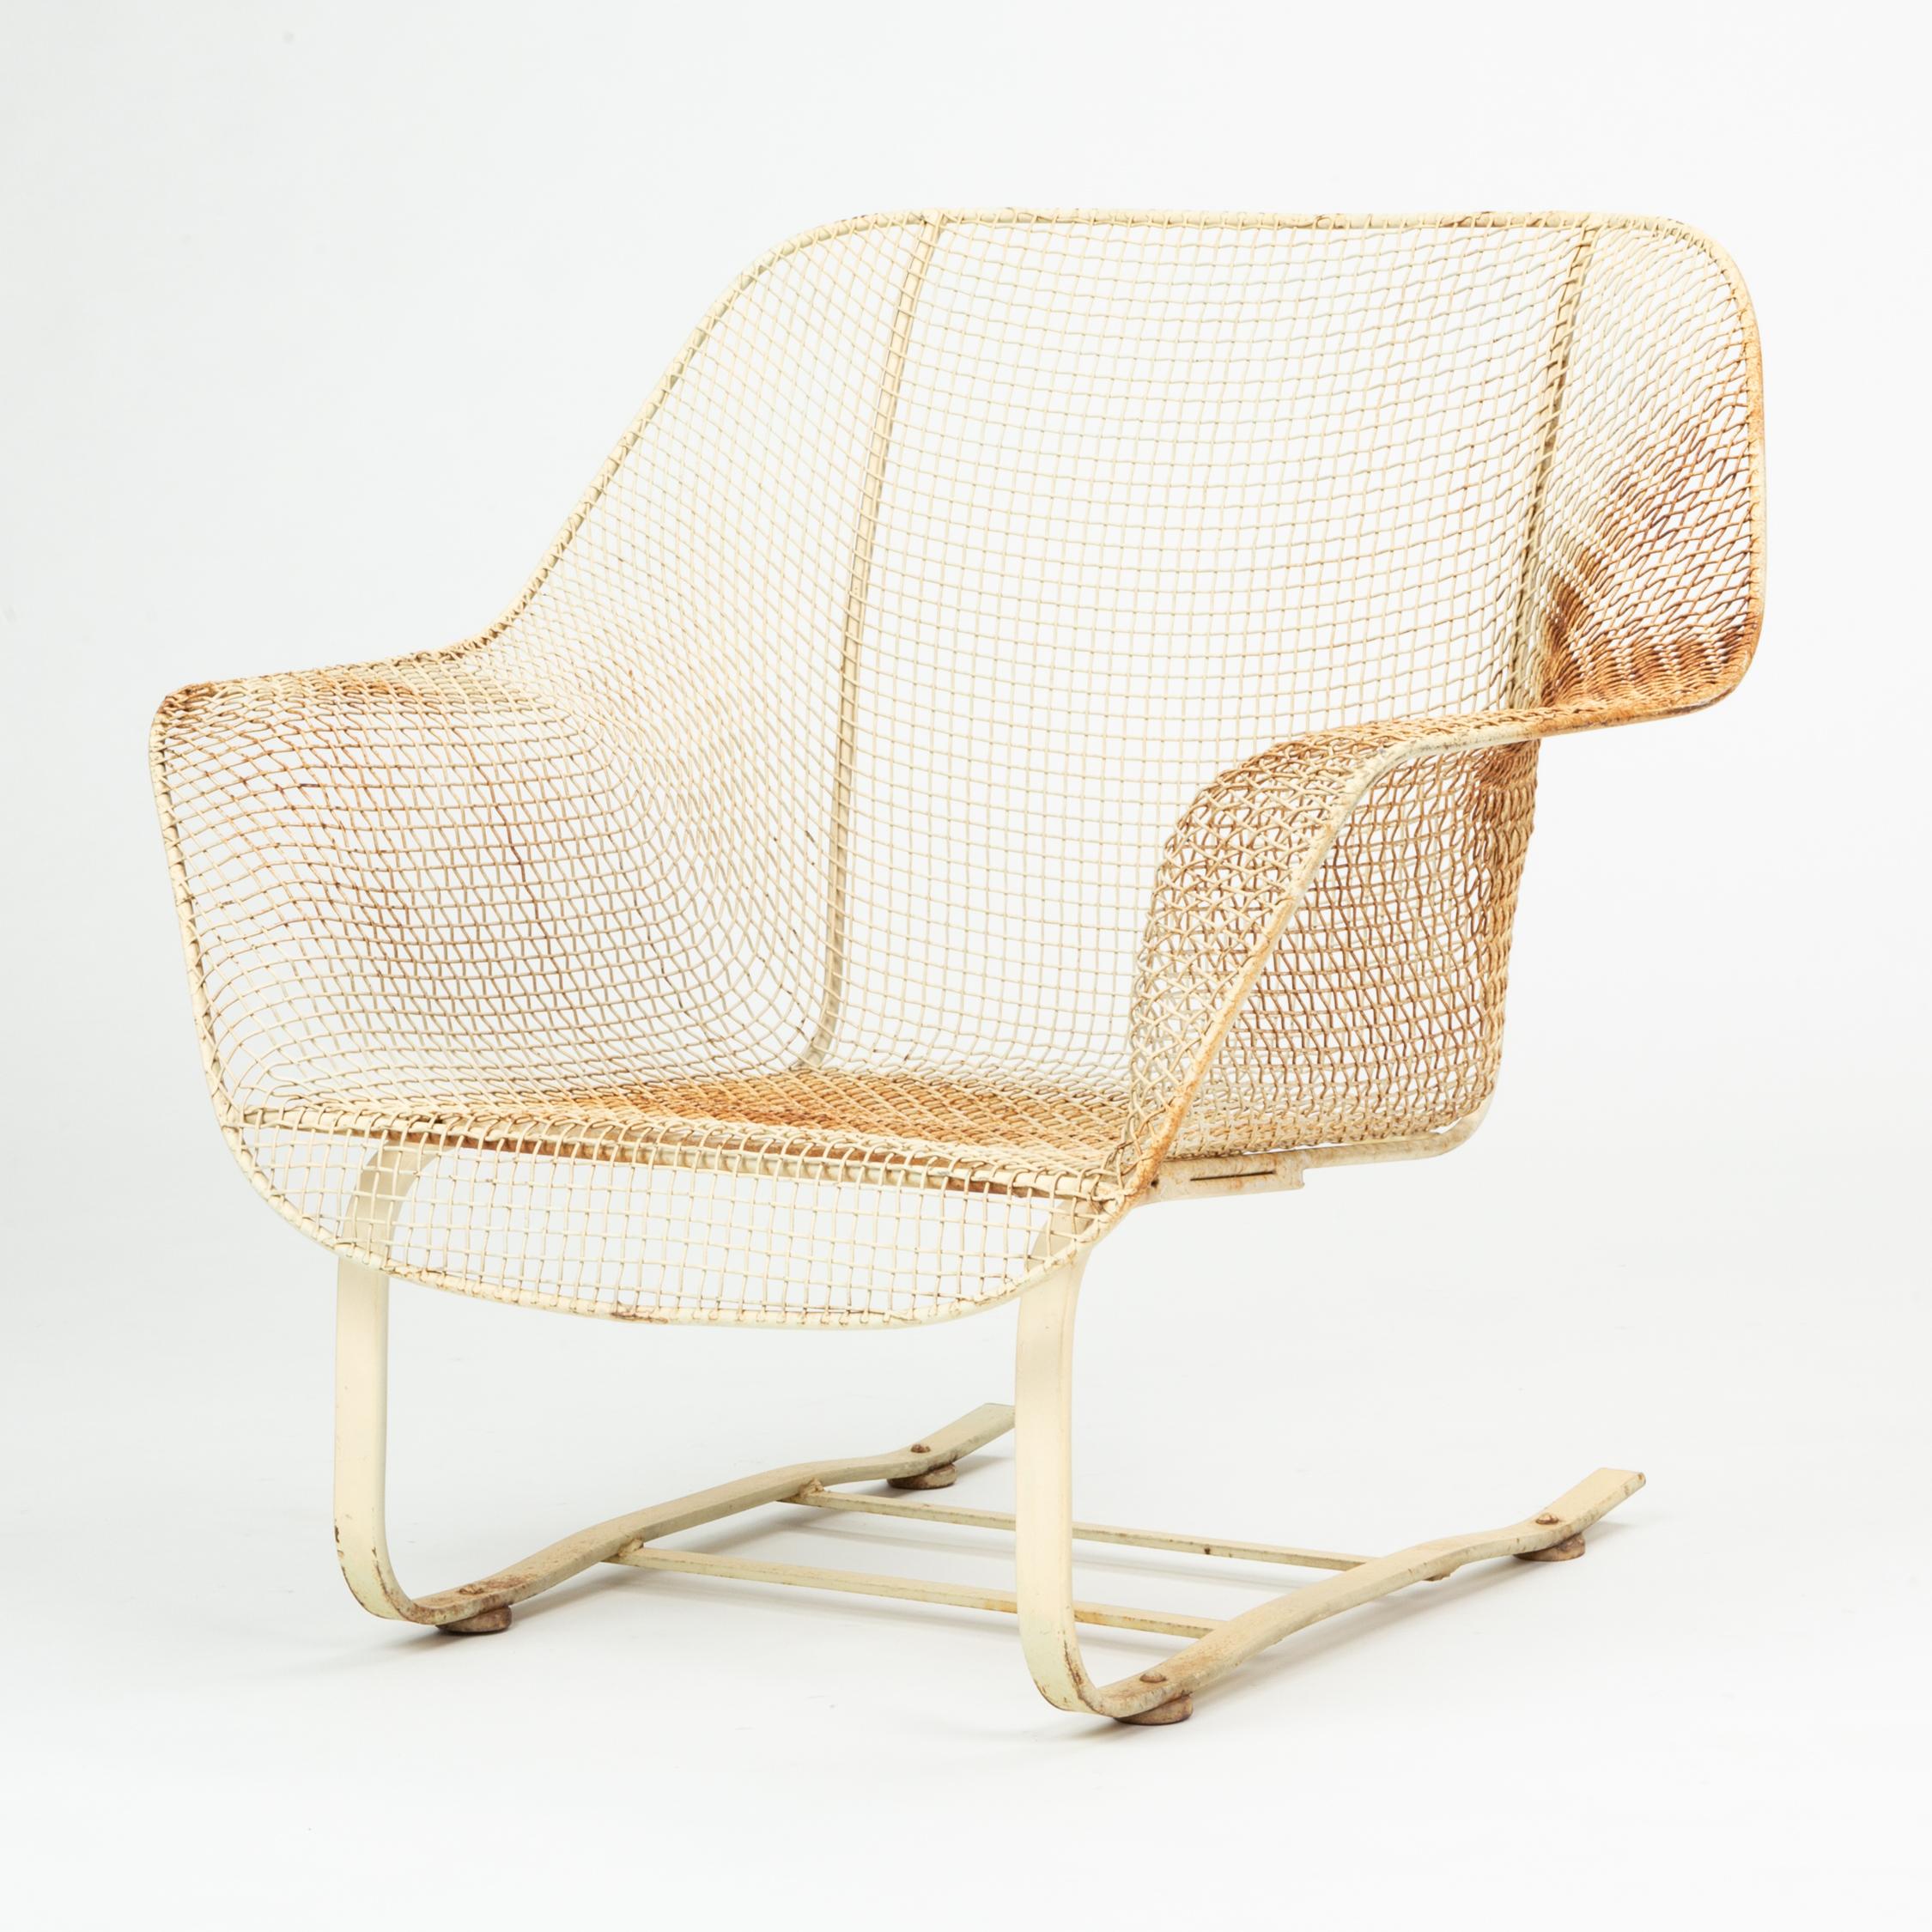 A rocking lounge chair from Russell Woodard’s 1956 Sculptura collection for his family company, Woodard Furniture. The low chair has the collection's signature molded wire mesh seat and its cantilevered base with two runners provides the rocking